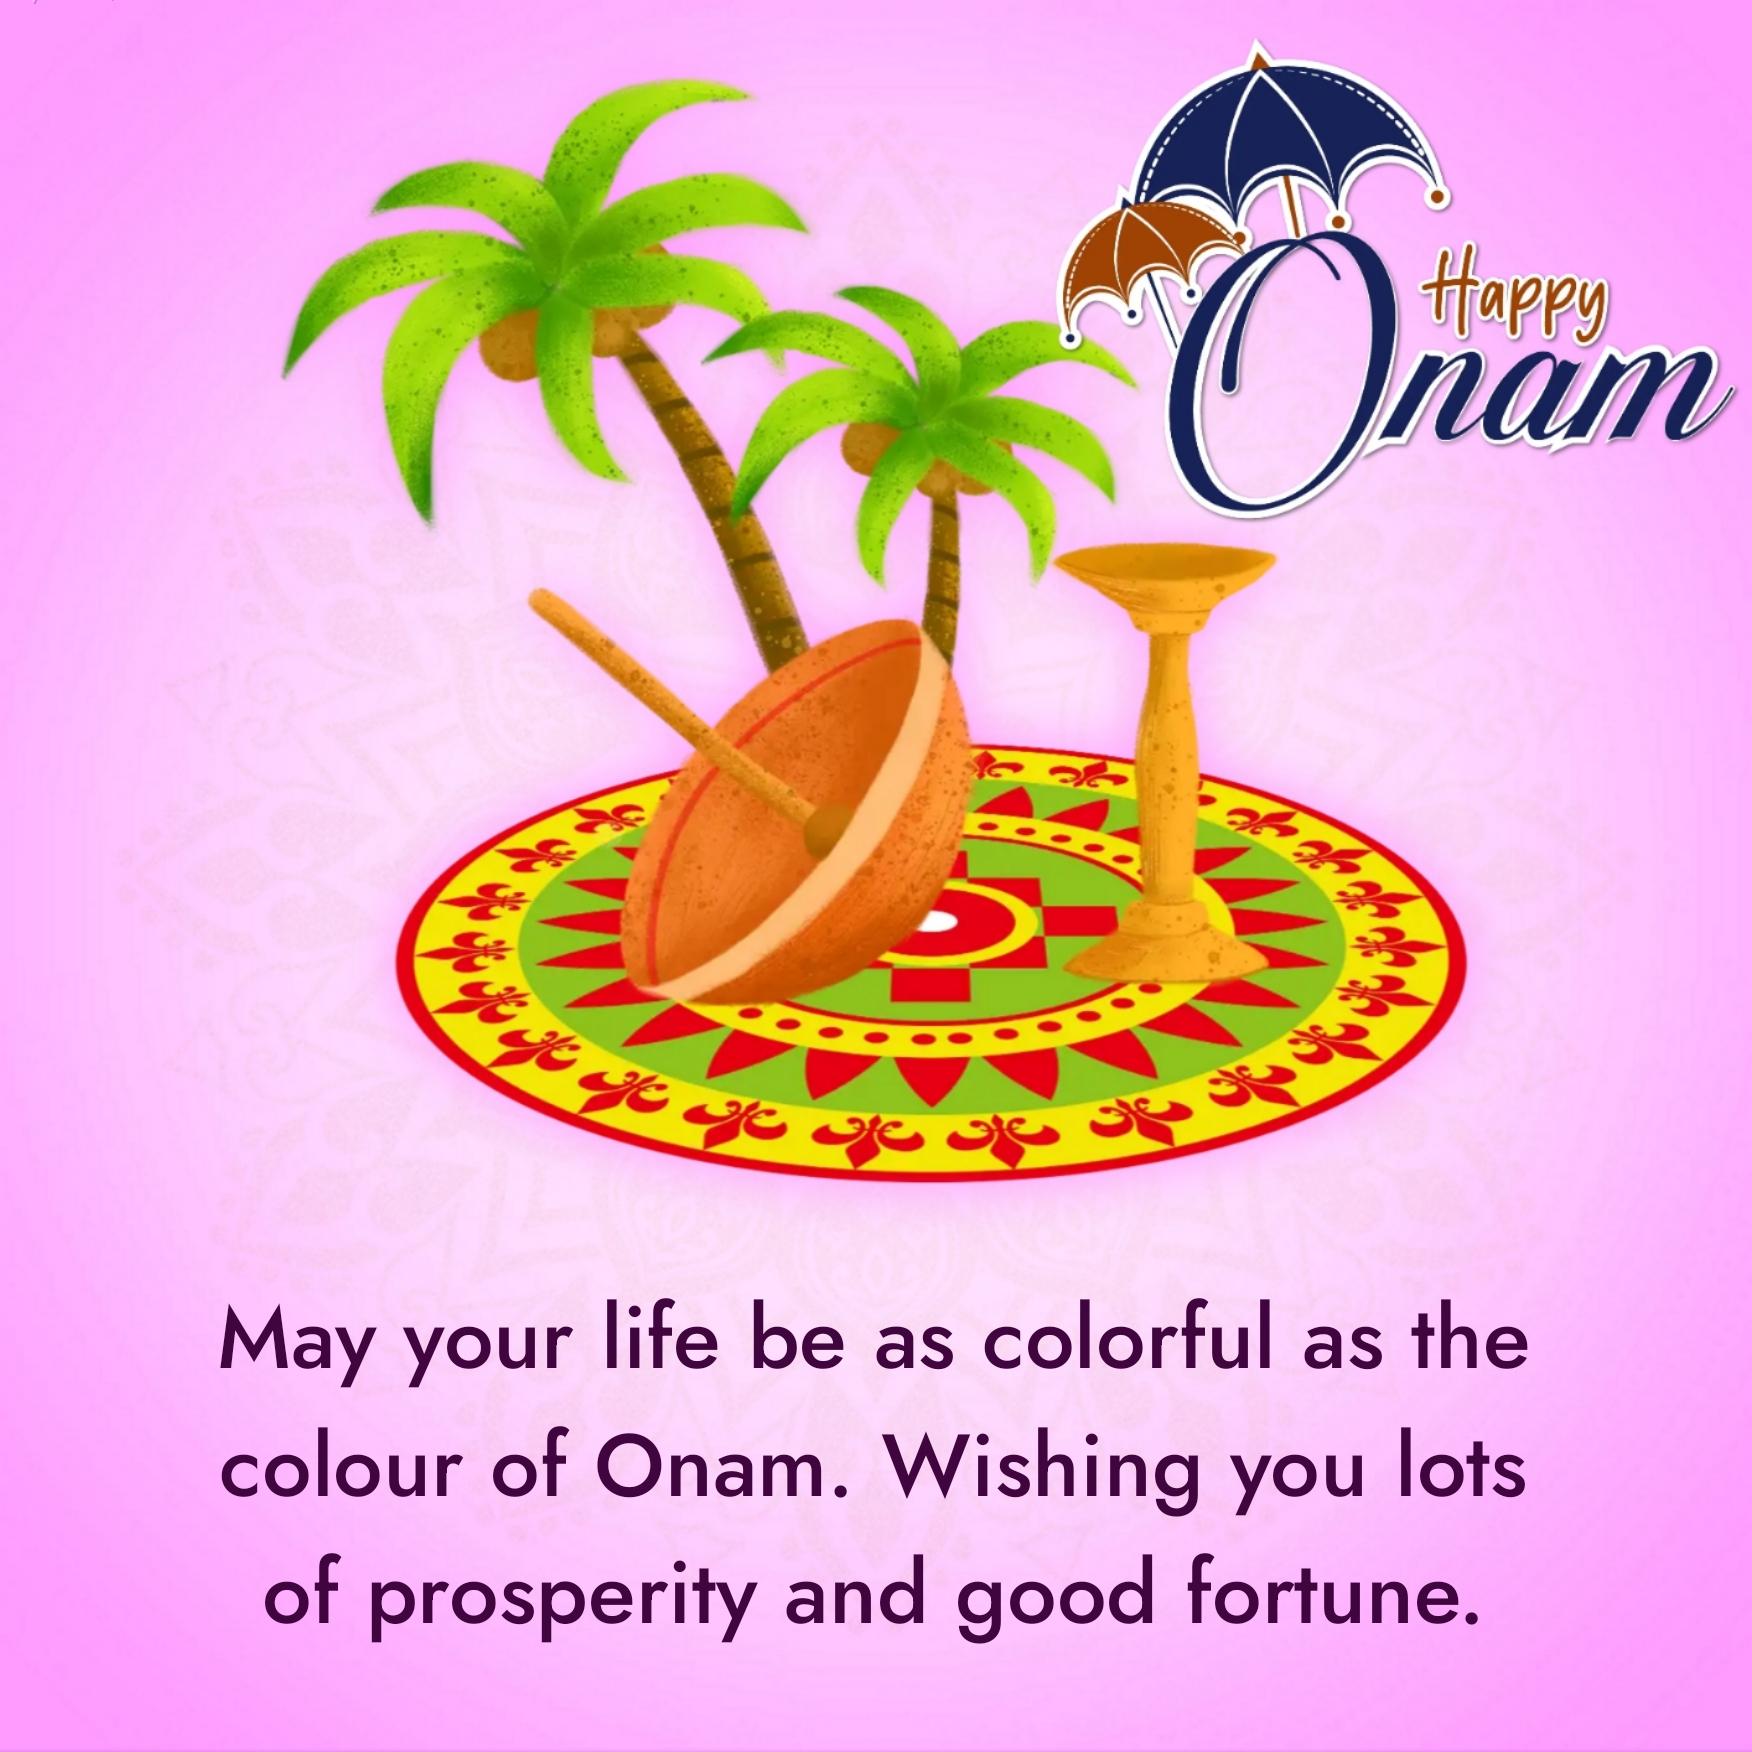 May your life be as colorful as the colour of Onam